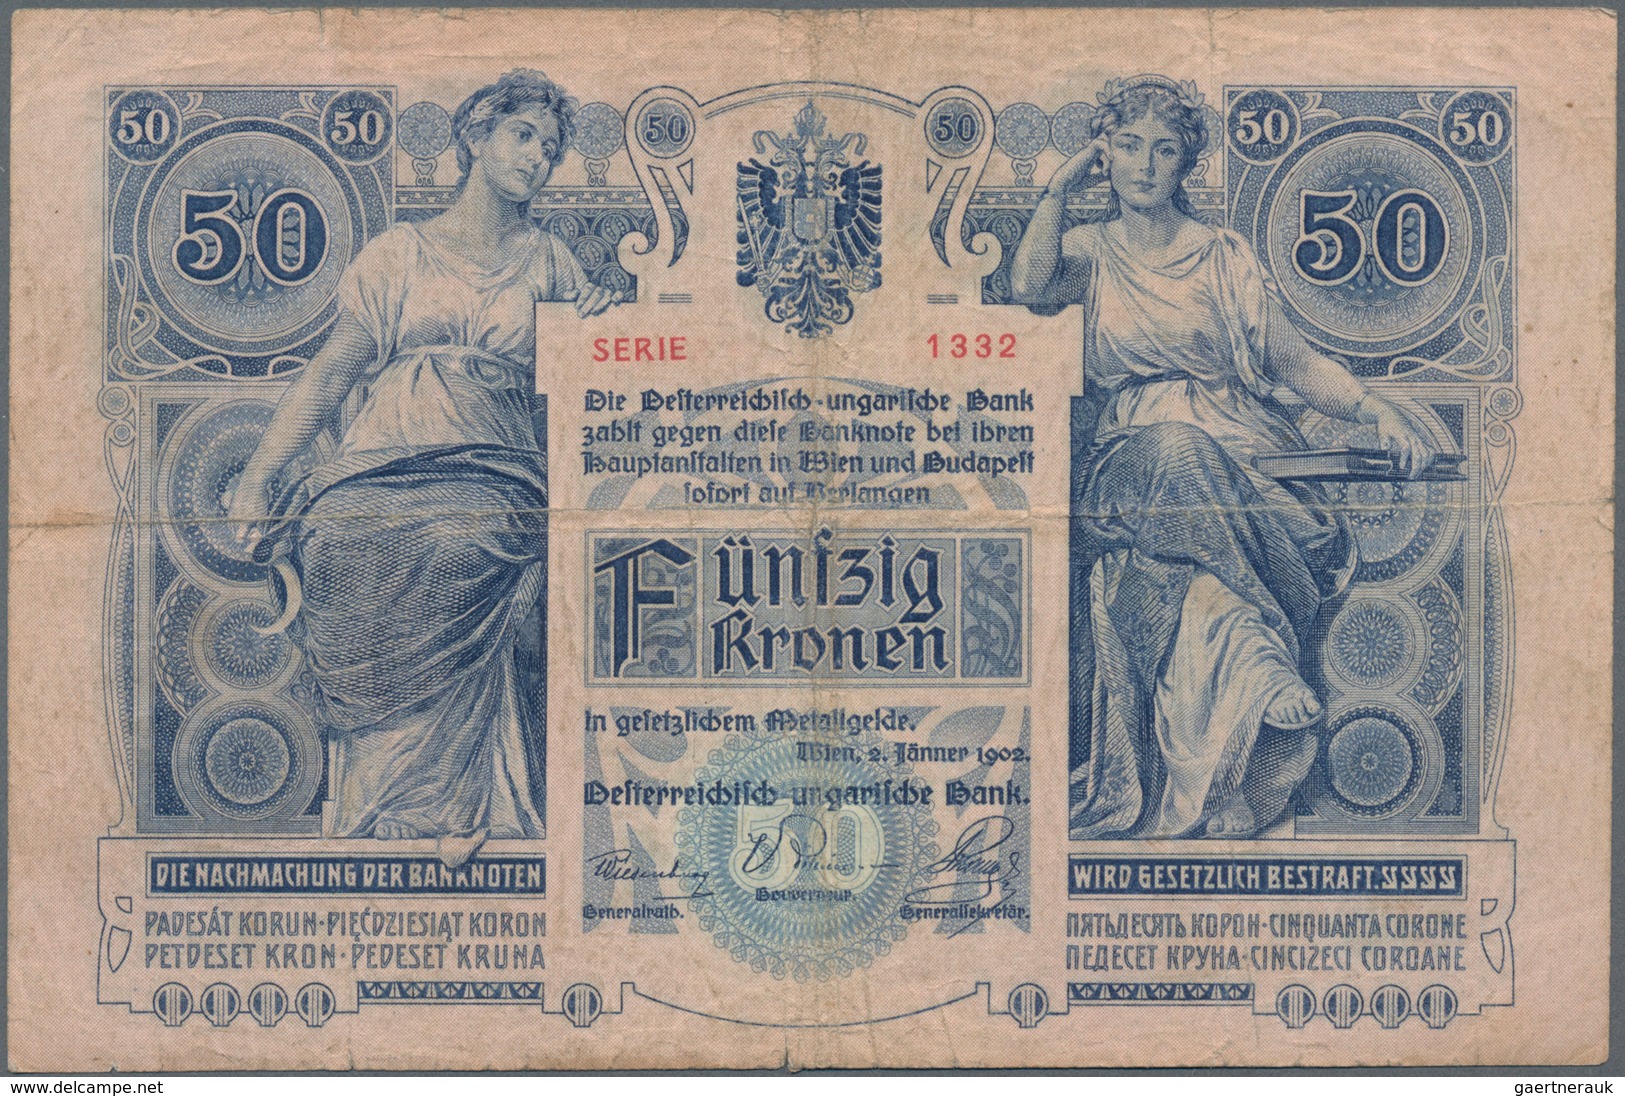 Alle Welt: Album with 112 banknotes from different countries and Notgeld for example Austria Wiener